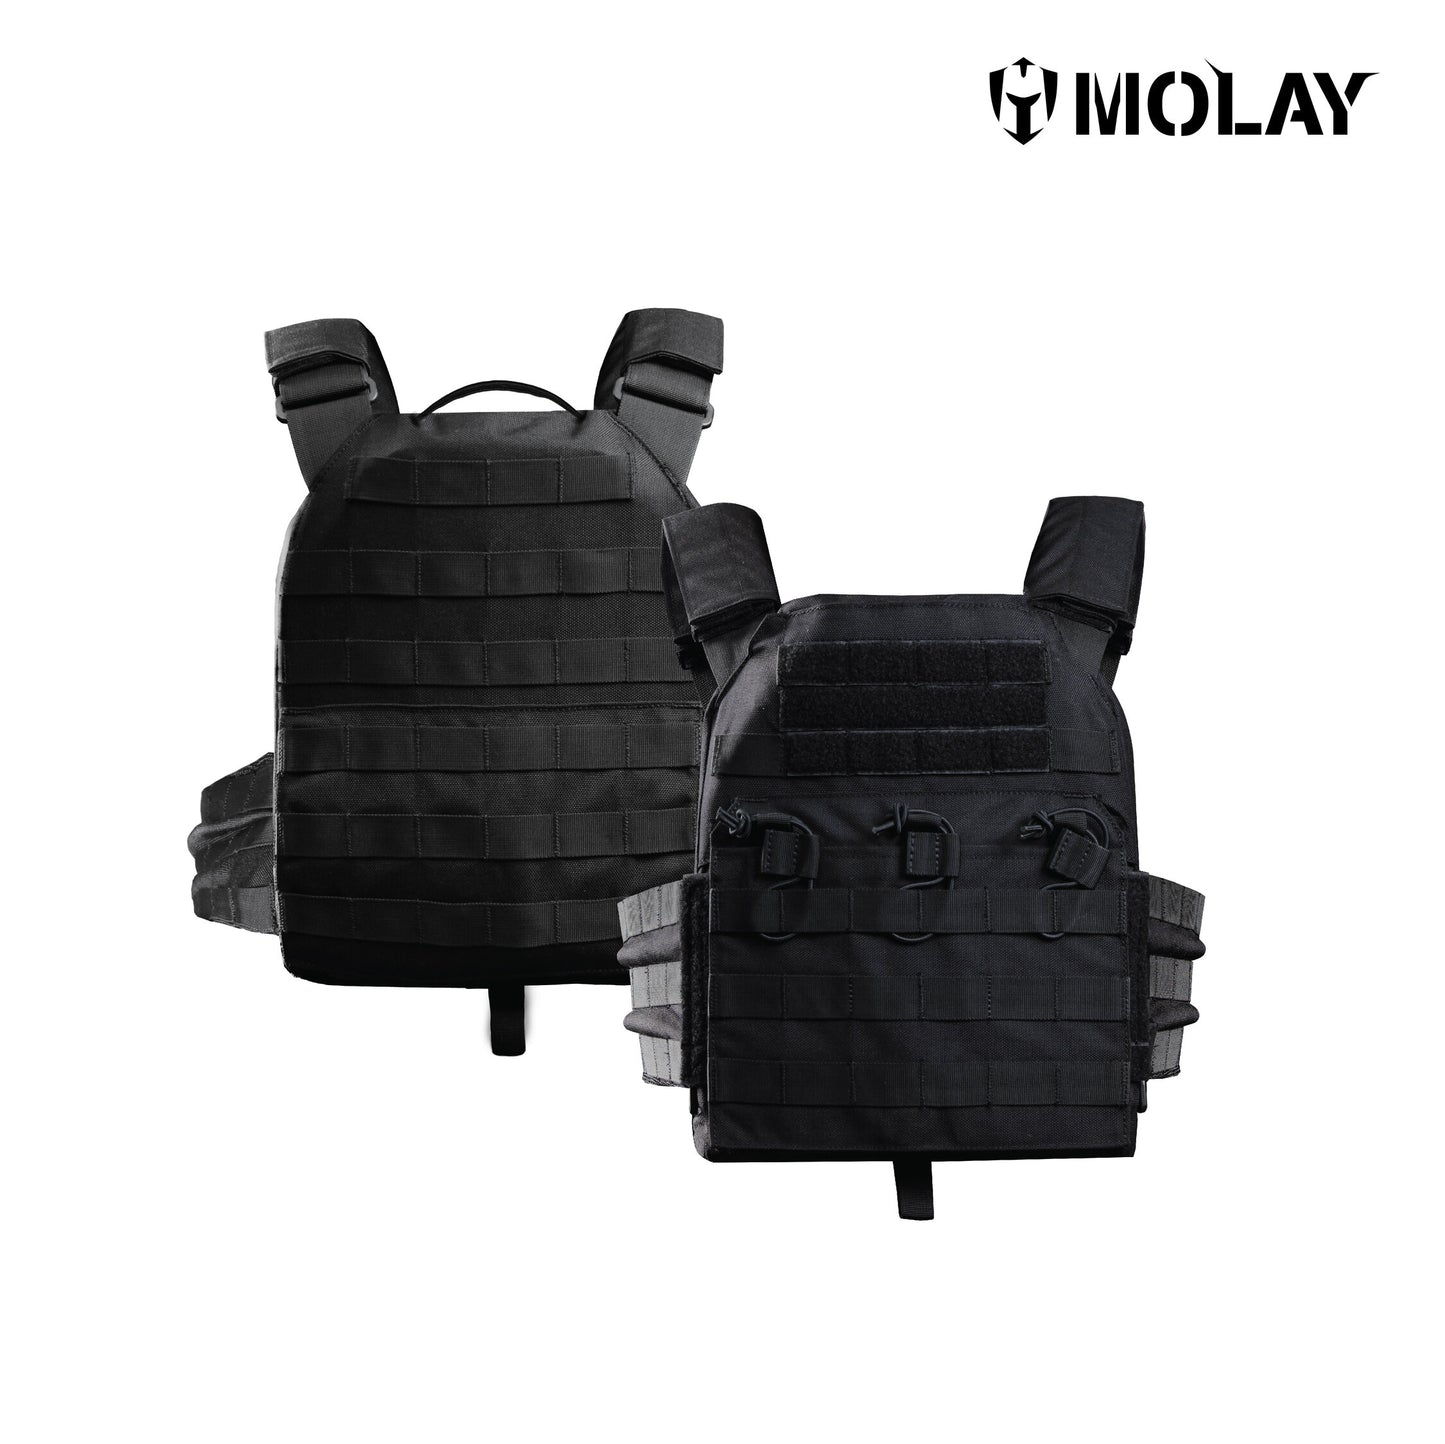 Molay® Xenomilus Plate Carrier